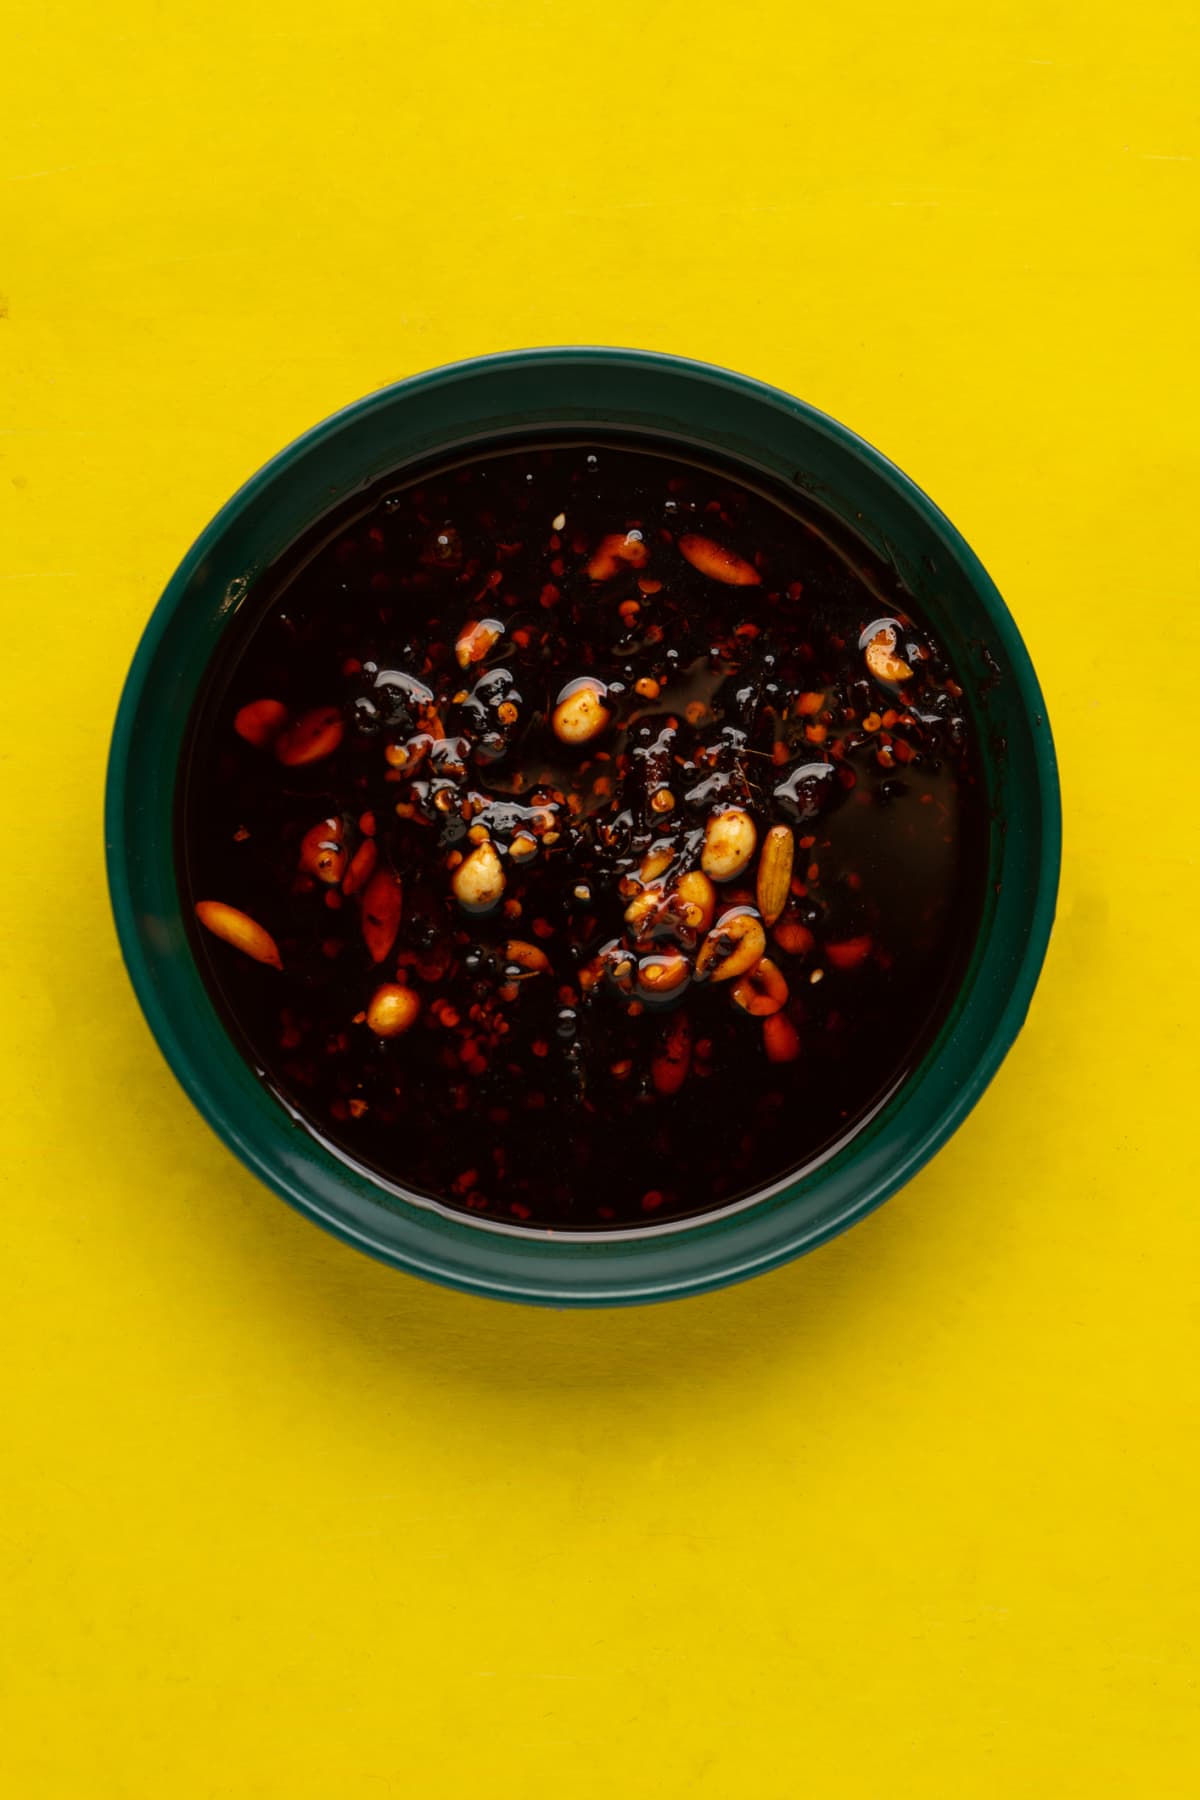 Chili oil sauce with sesame and peanuts called macha. Traditional Mexican food